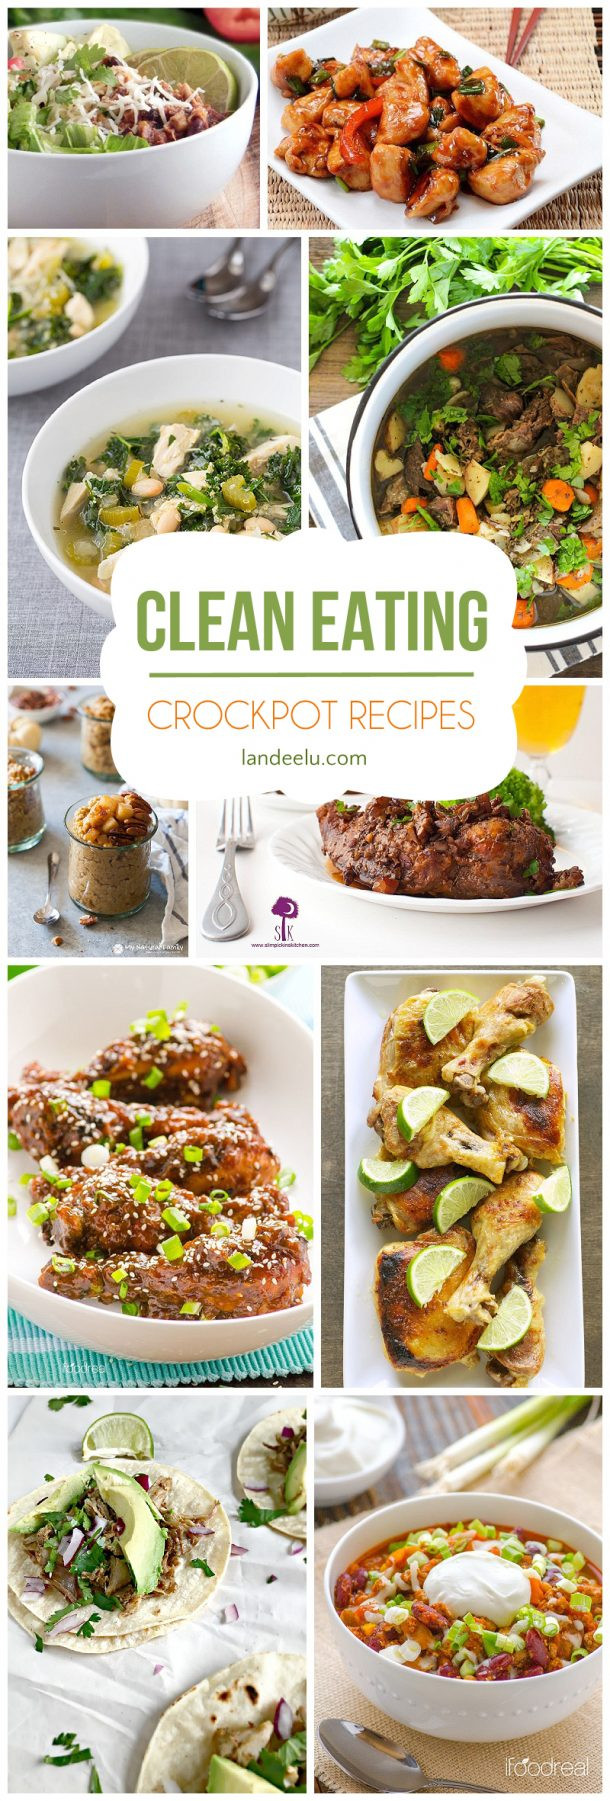 Clean Eating Crockpot Meals
 Delicious Clean Eating Crockpot Recipes Page 2 of 2